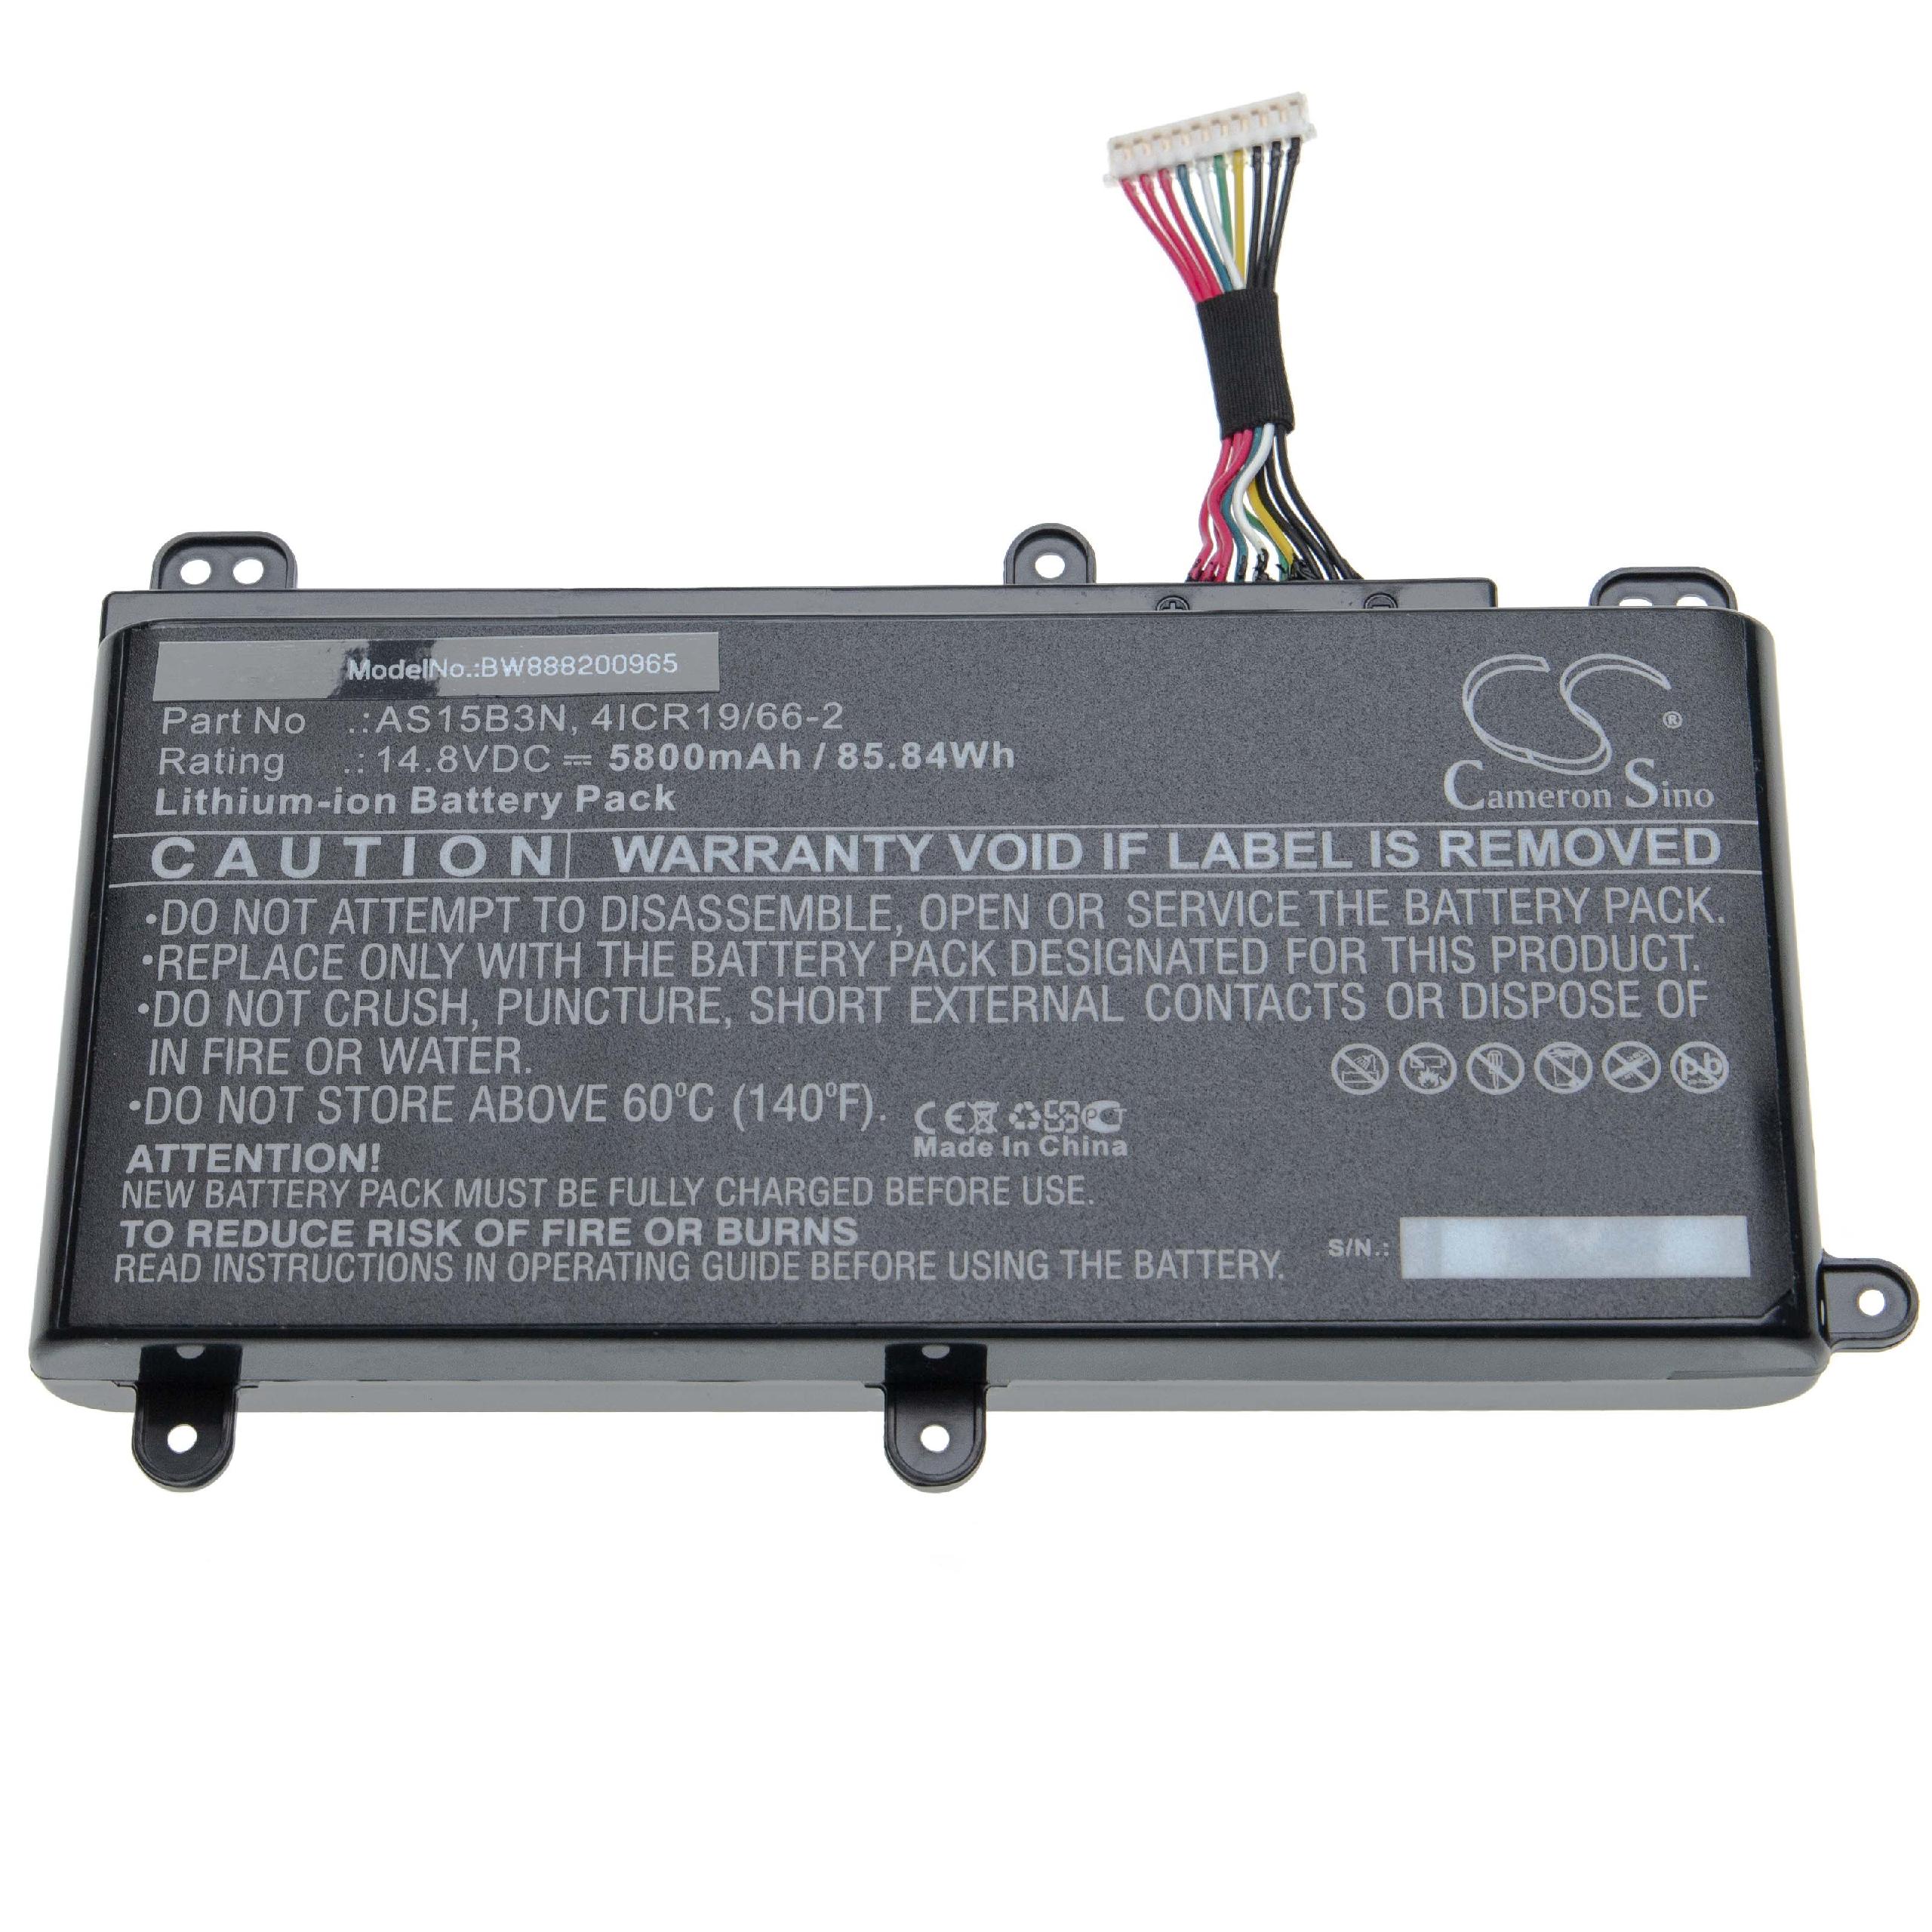 Notebook Battery Replacement for Acer 4ICR19/66-2, AS15B3N, KT.00803.004 - 5800mAh 14.8V Li-Ion, black